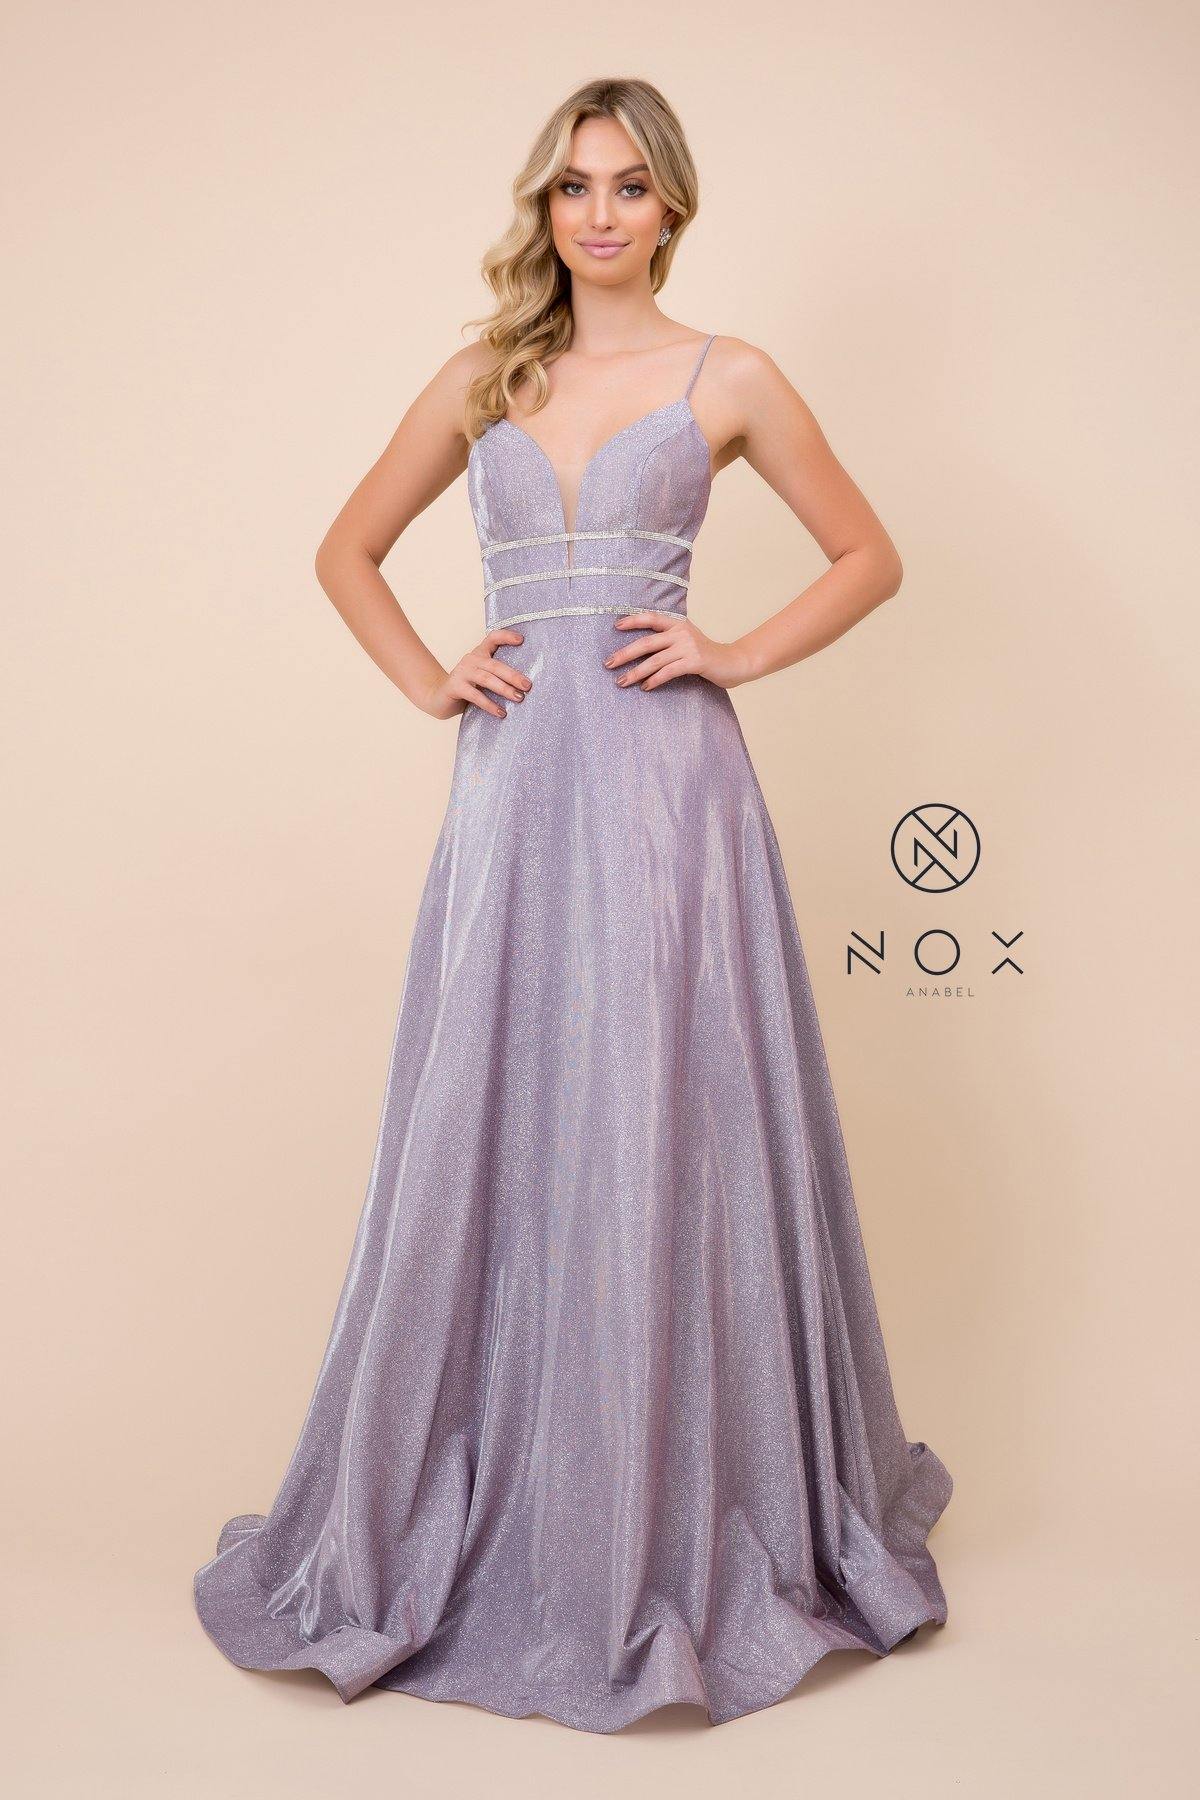 Long Glitter Dress With Beaded Waistband - The Dress Outlet Nox Anabel